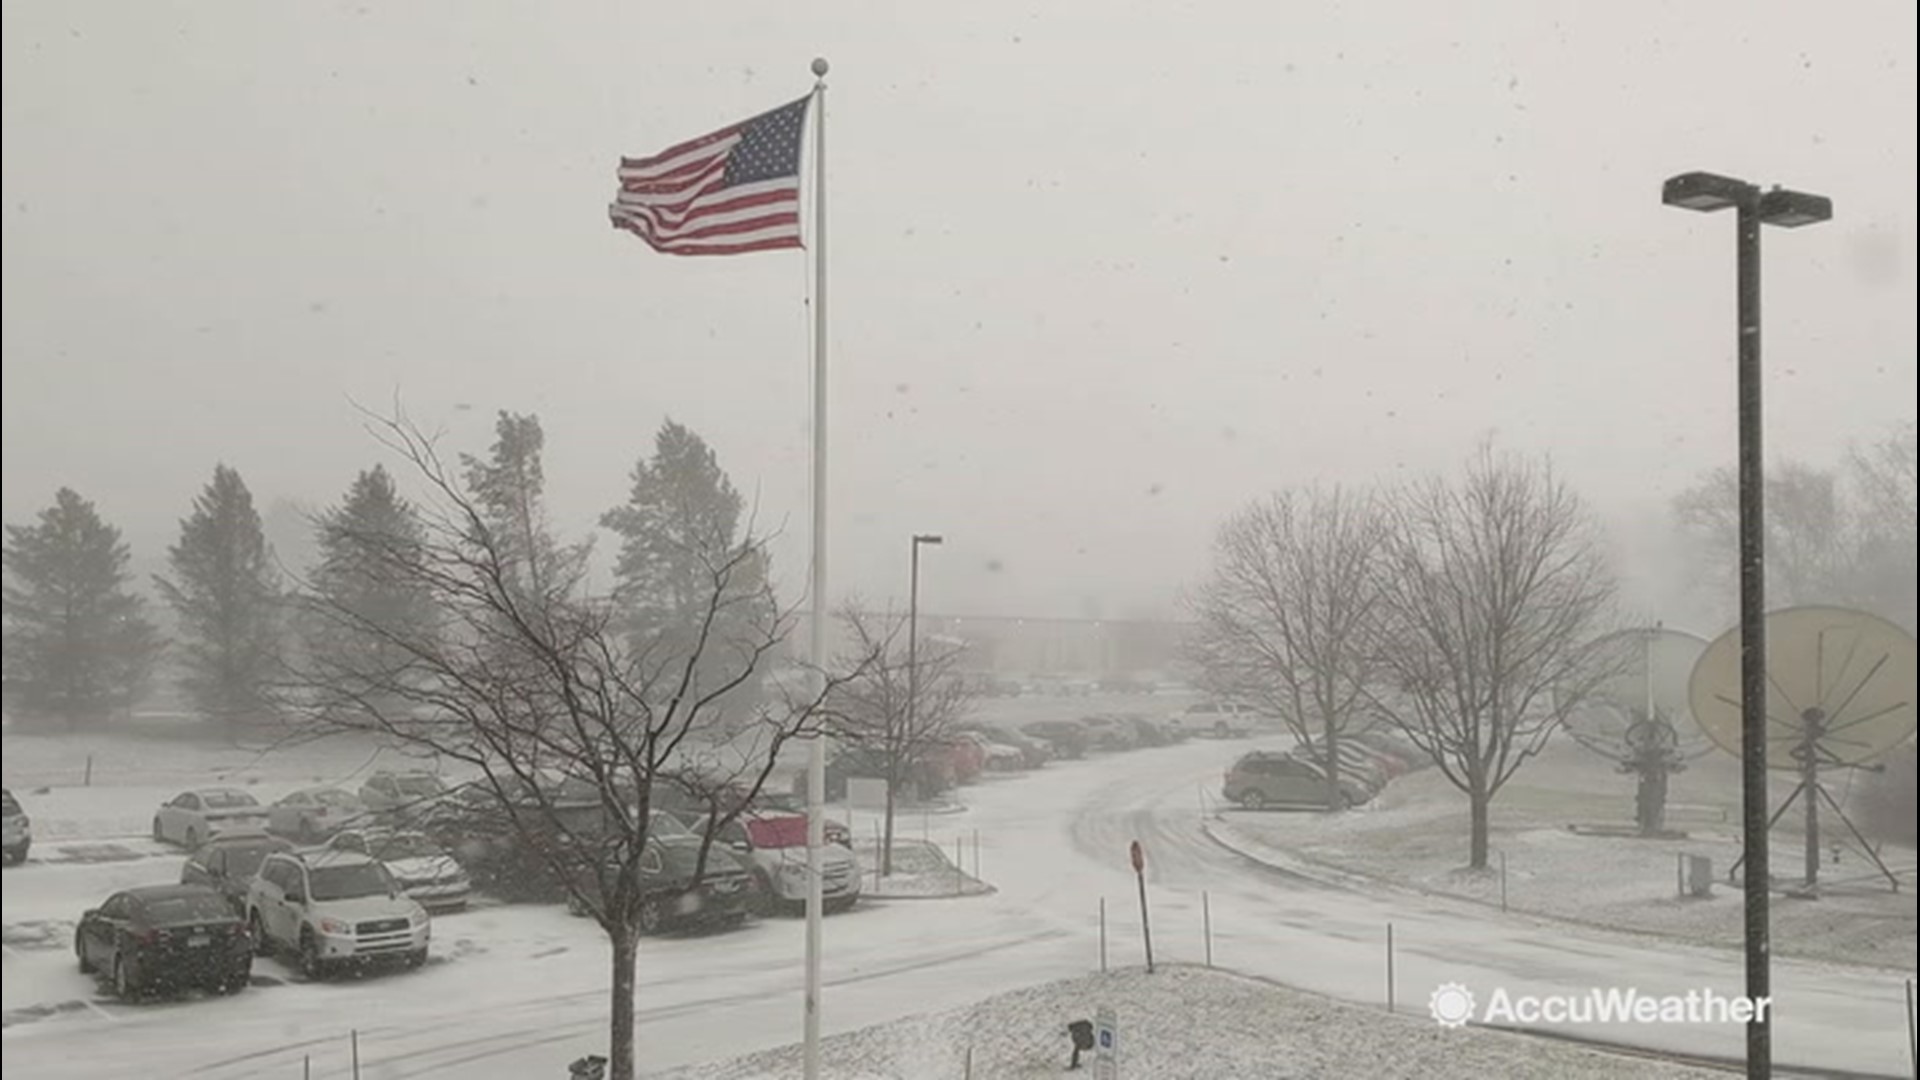 Snowfall has hit the northeast hard on Dec. 18. It was even felt right here at AccuWeather's headquarters in State College, Pennsylvania.